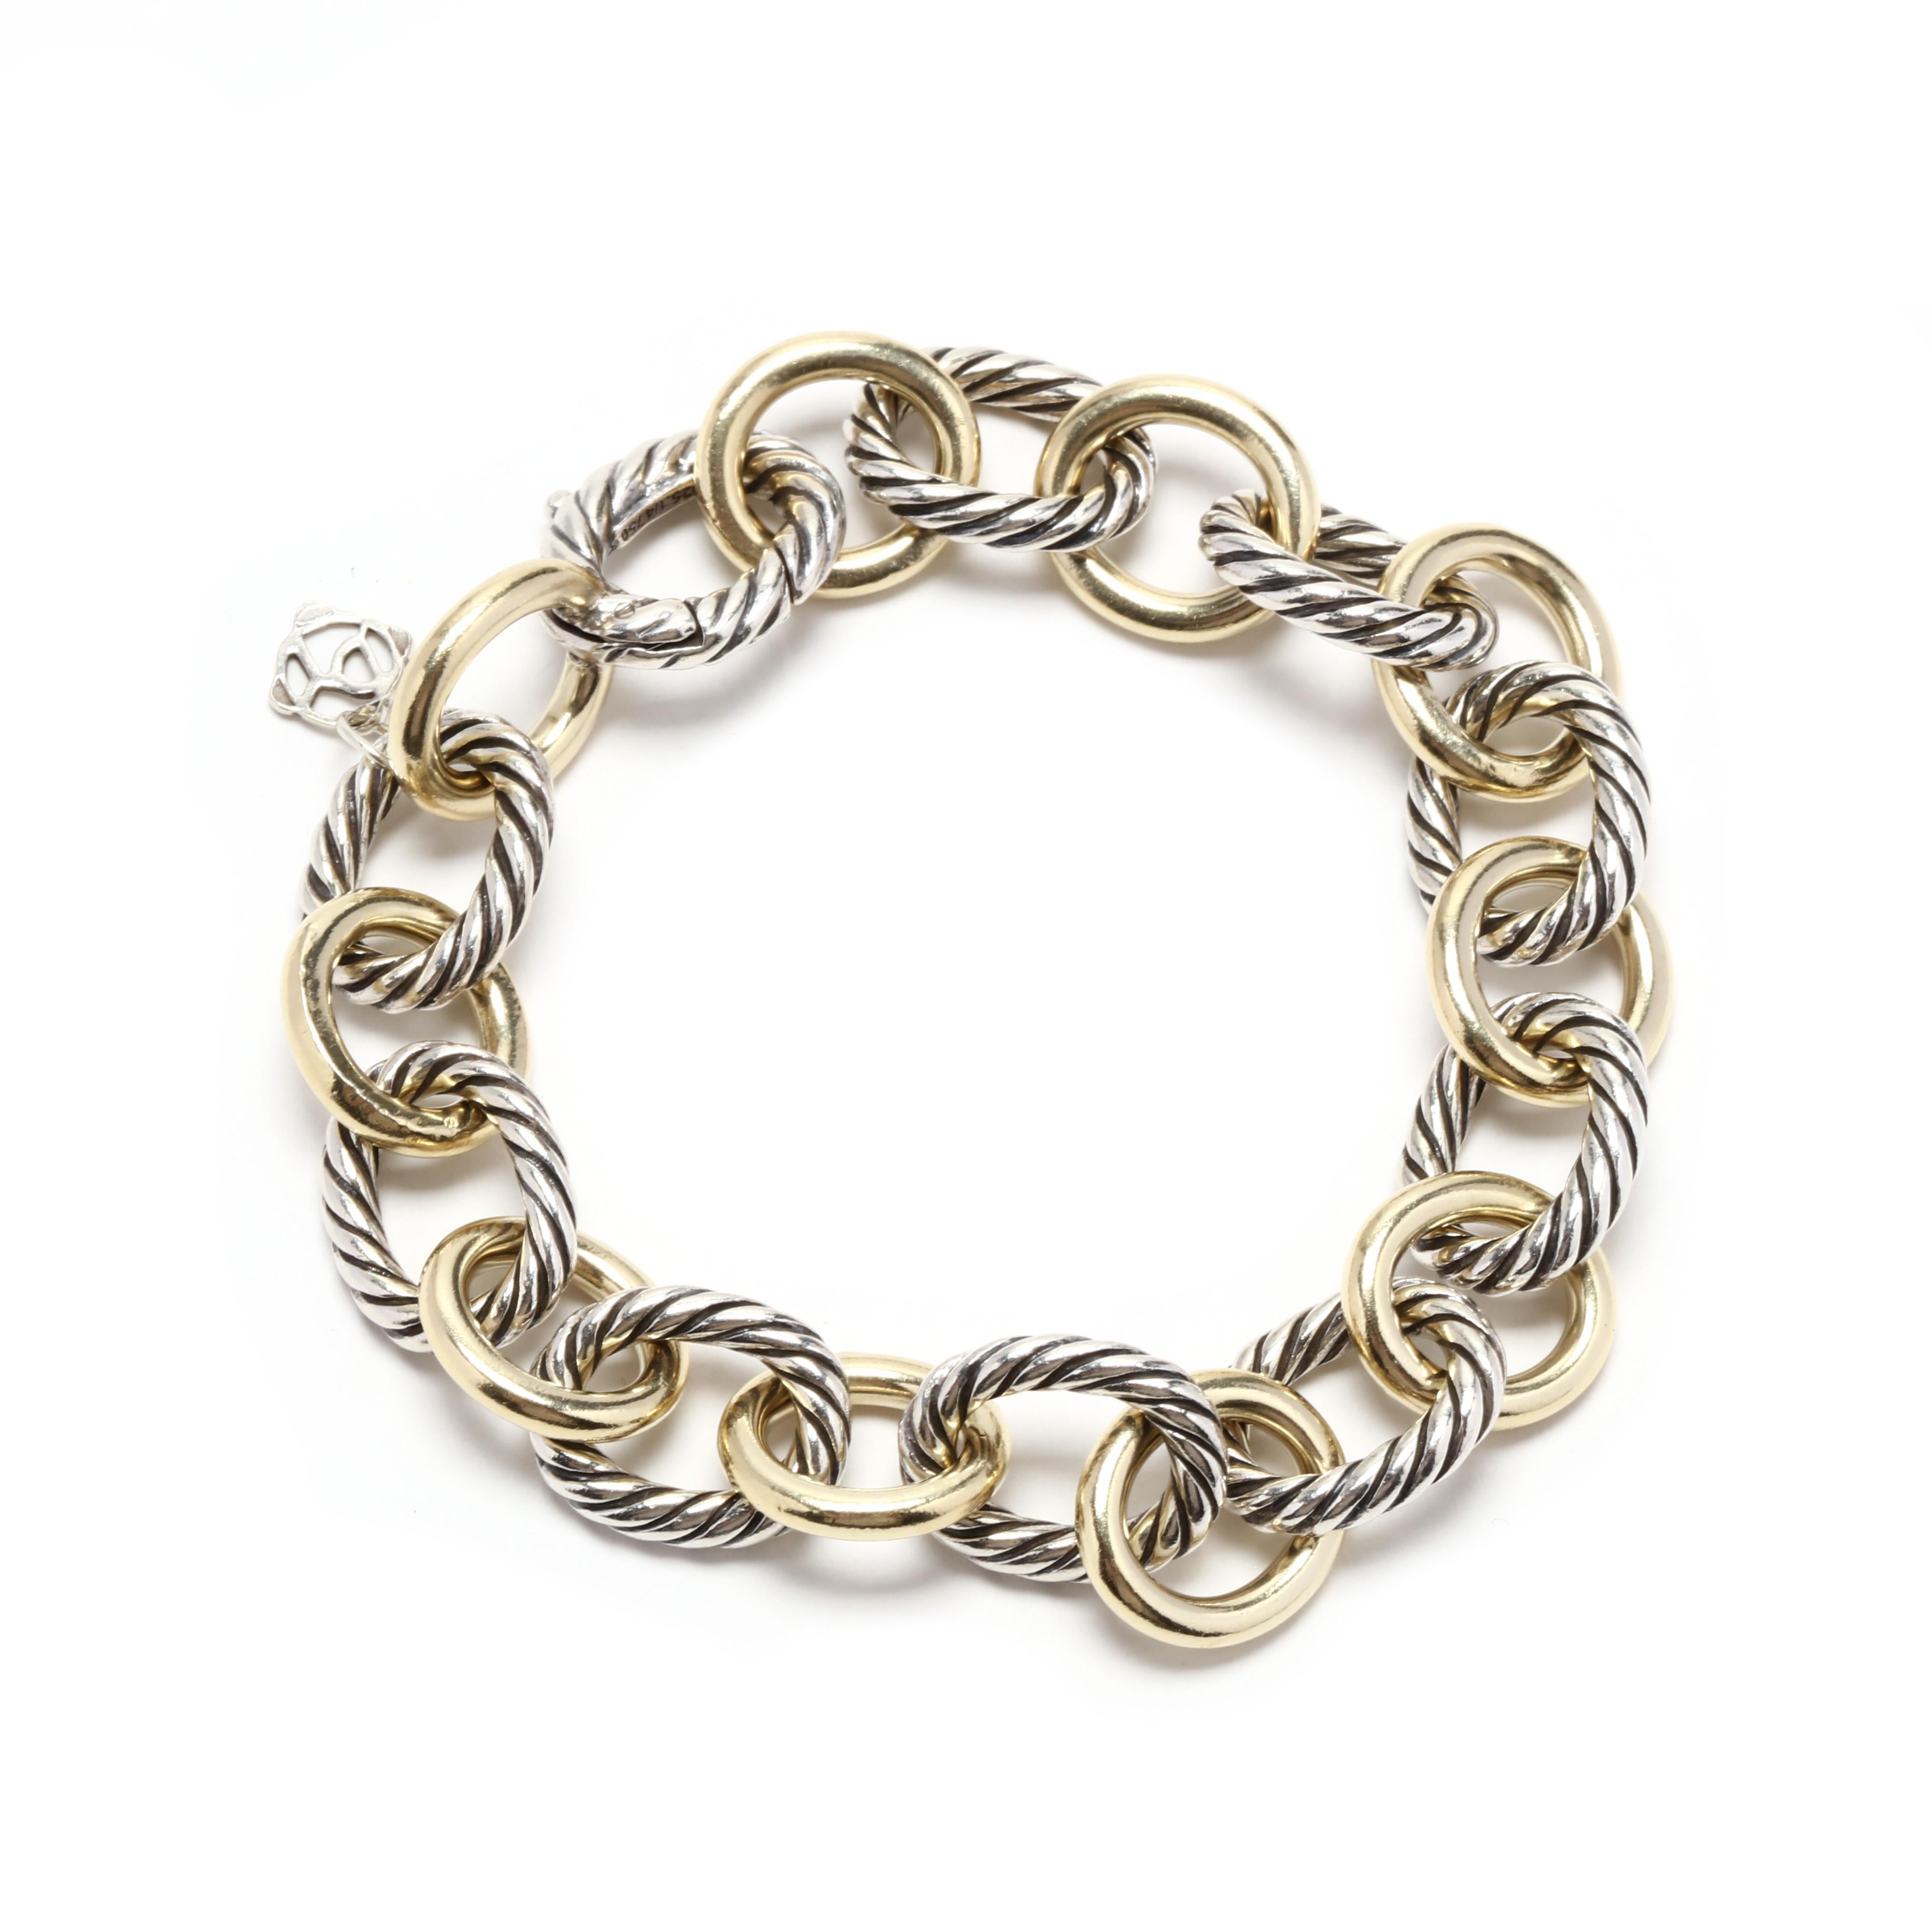 A David Yurman 18 karat yellow gold and sterling silver large cable link bracelet. This bracelet features alternating polished gold oval links with silver oval cable links and with a hidden clasp.



Length: 7.75 in.



Width: 1/2 in., 12